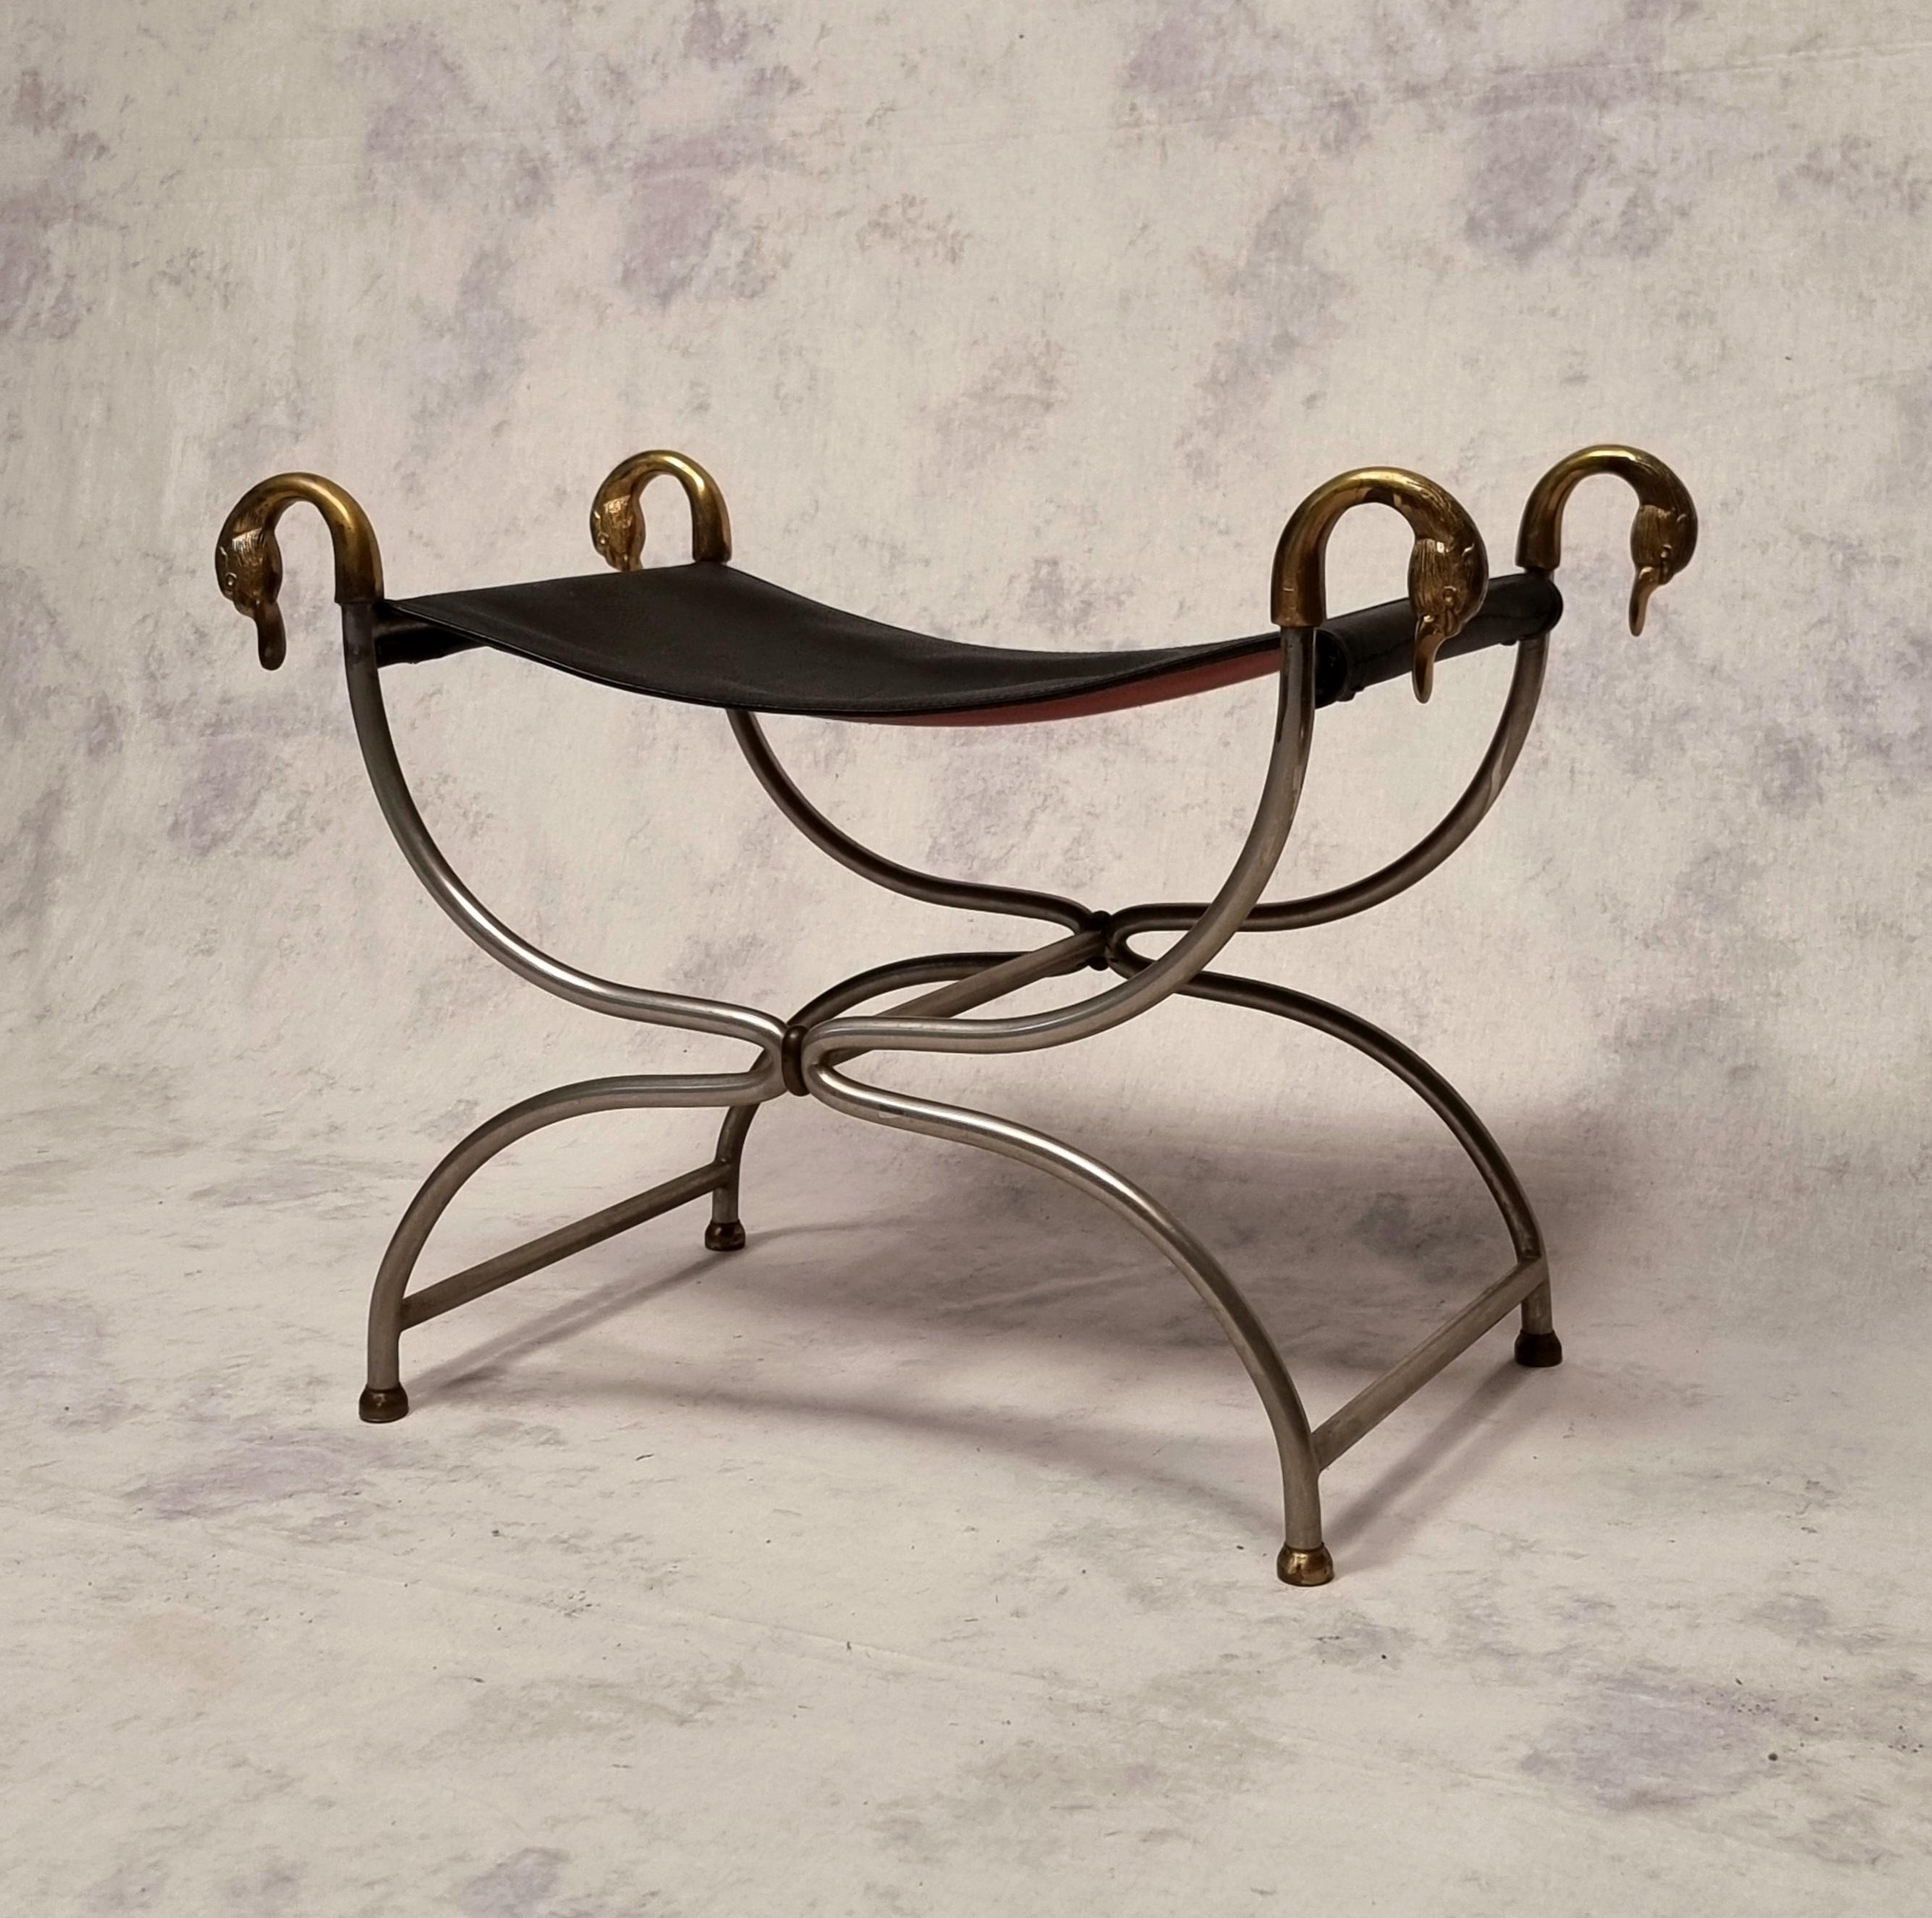 Stool from Maison Jansen in the neoclassical style. This curule stool dates from the 1950s. This superb model, whose structure is made of steel, is decorated with bronze swan necks on the four uprights. The seat is in quality stretched leather. The